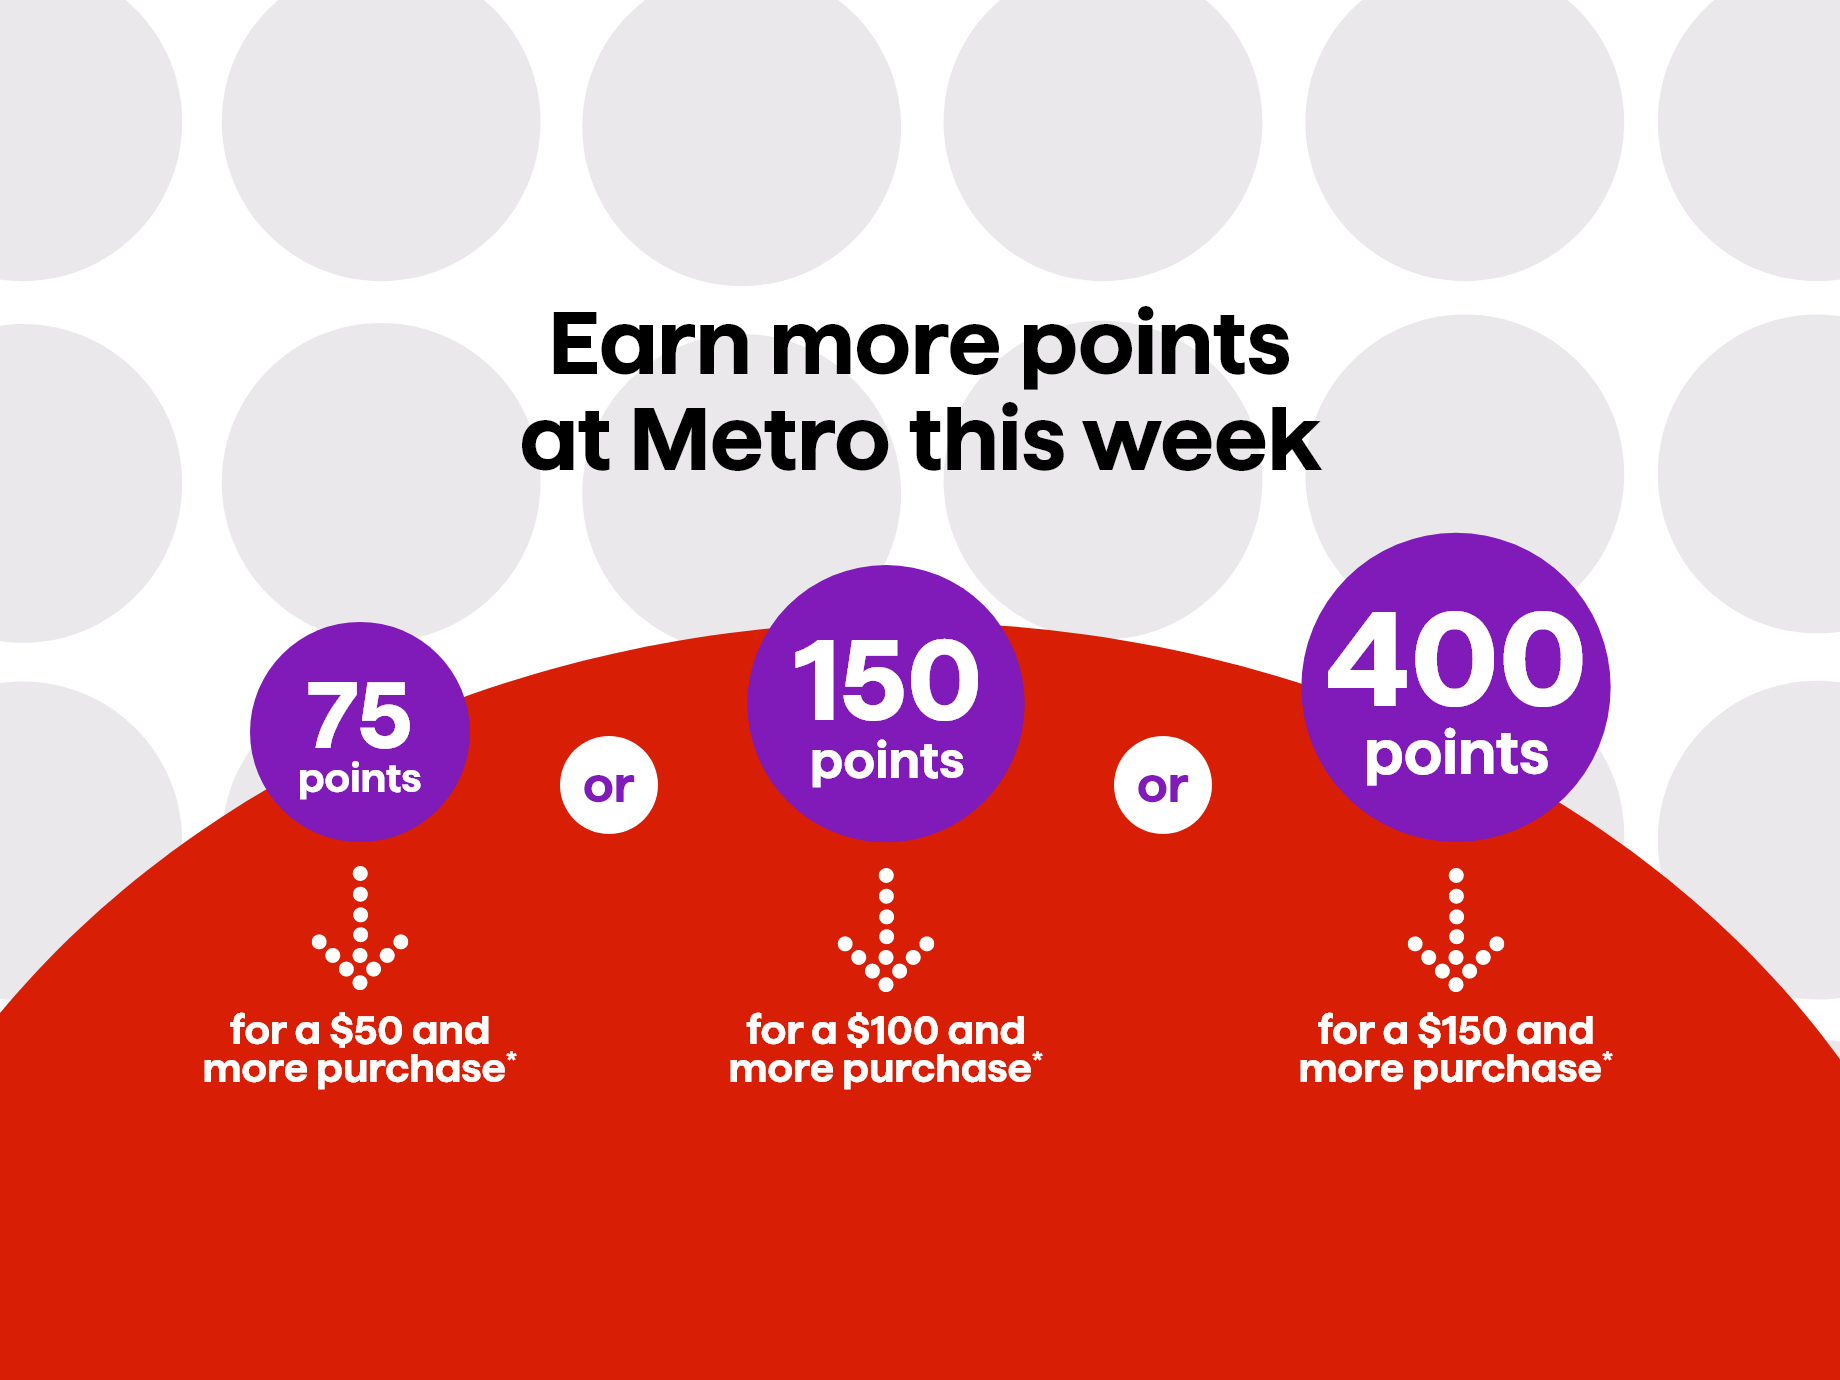 Earn more points at Metro this week. 75 points for a $50 and more purchase, 150 points for a $100 and more purchase or 400 points for a $150 and more purchase*